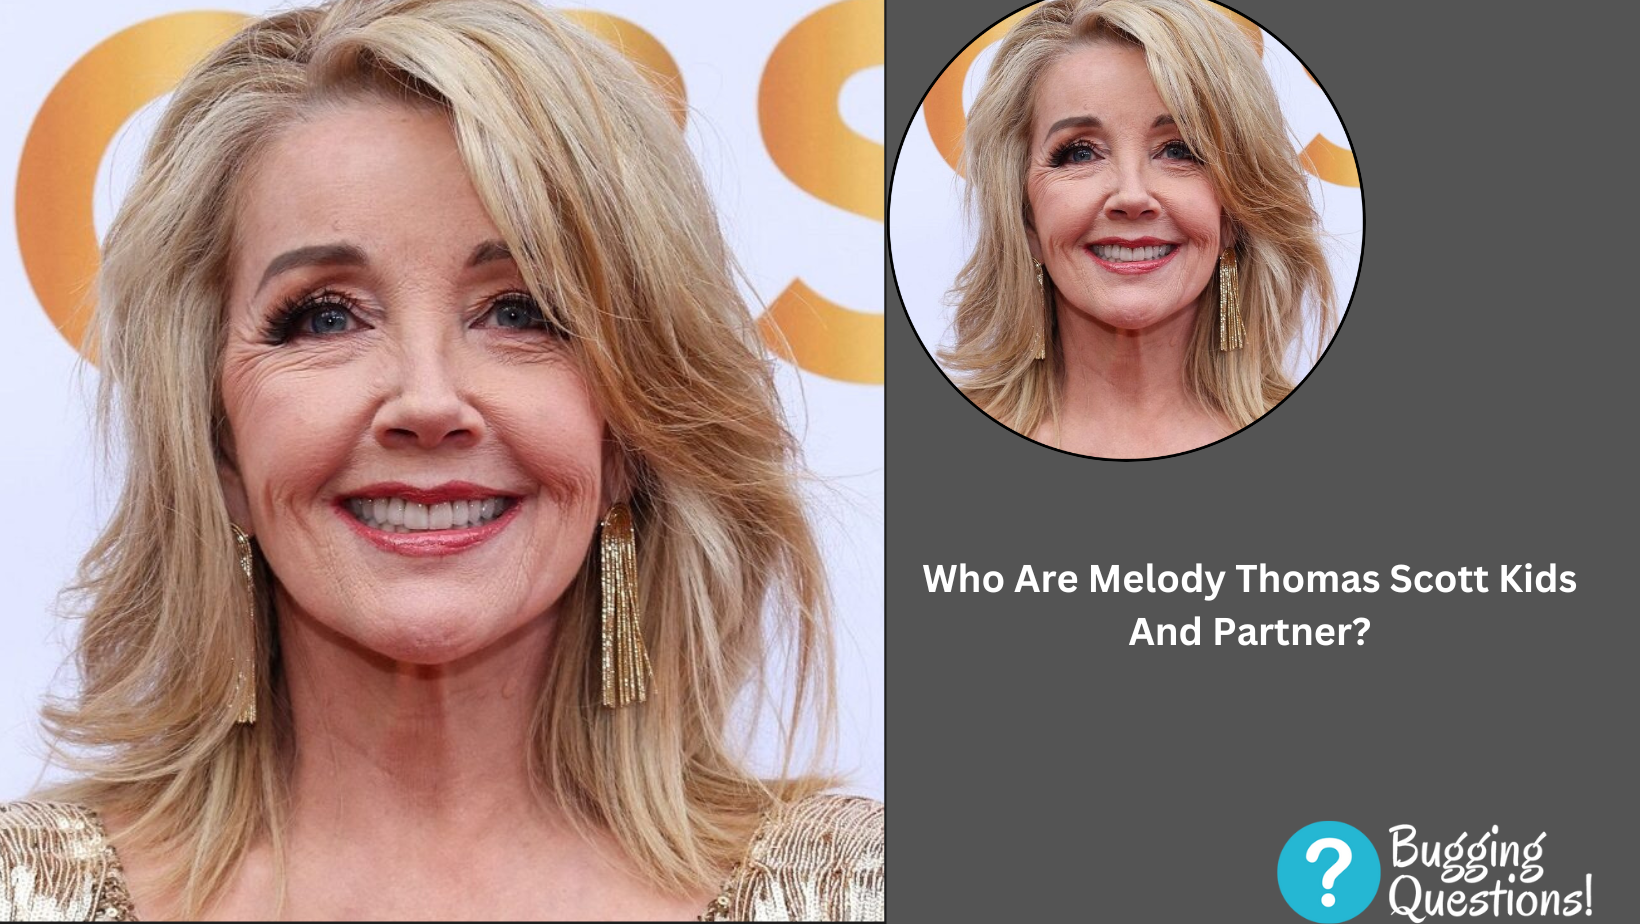 Who Are Melody Thomas Scott Kids And Partner?